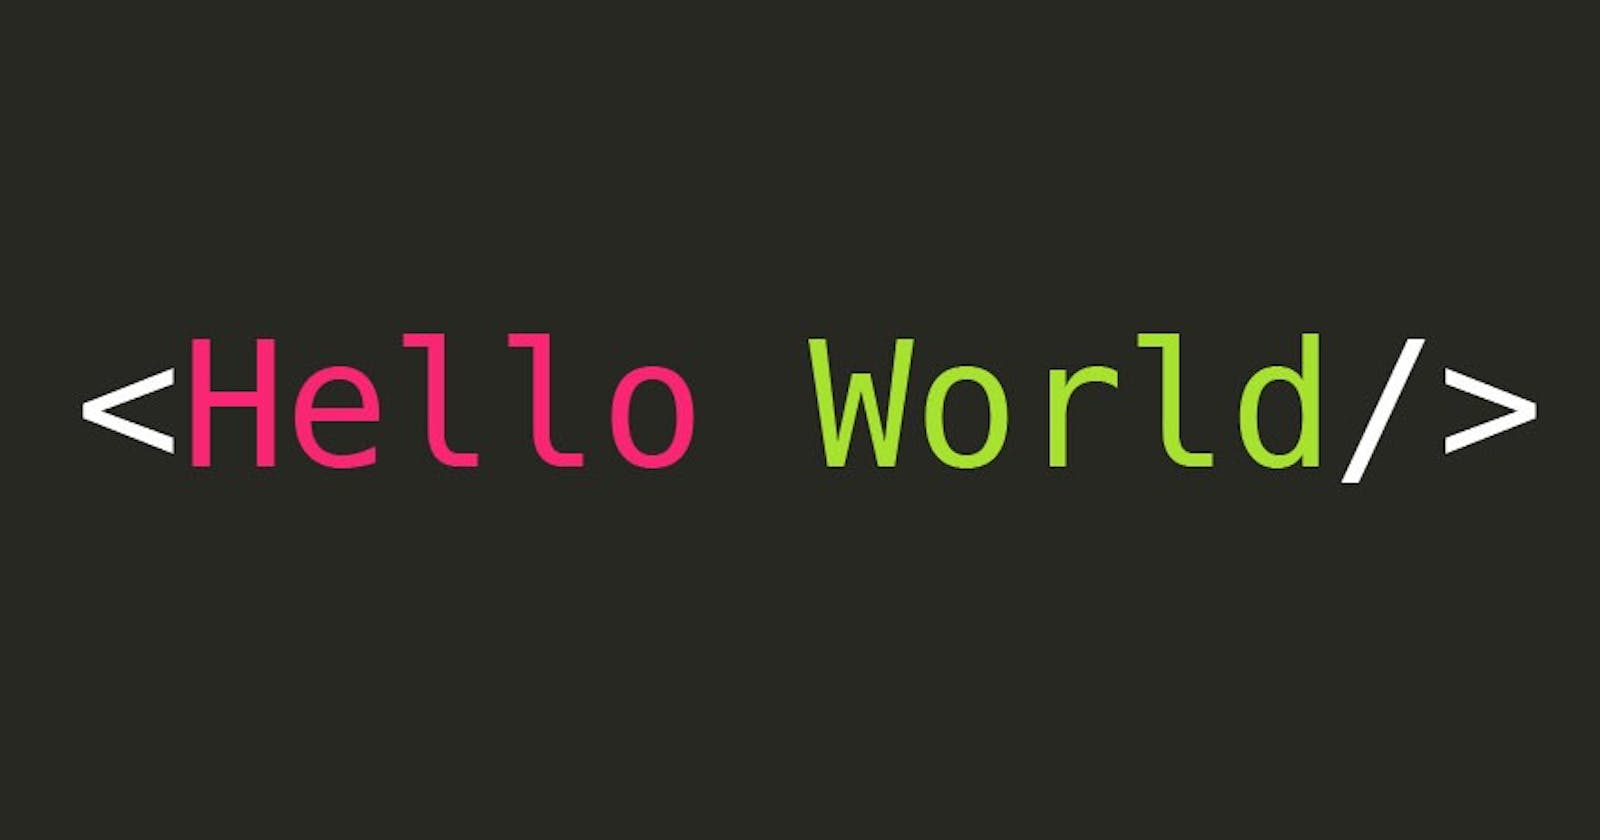 Hello World! in most commonly used Programming languages of 2021!